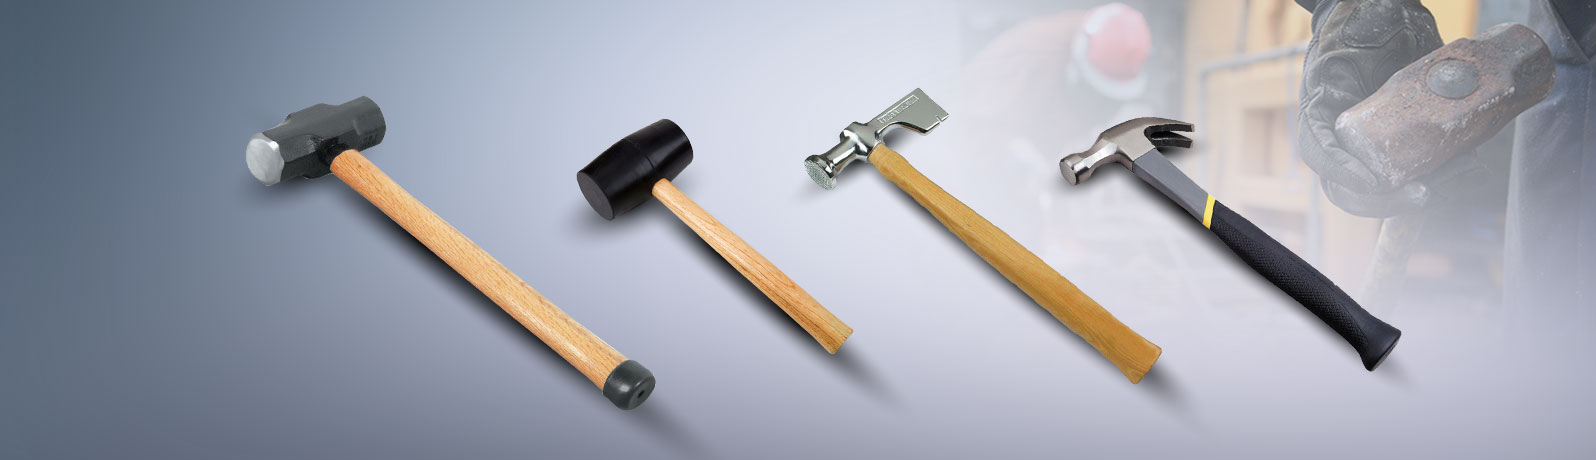 hammers mallets